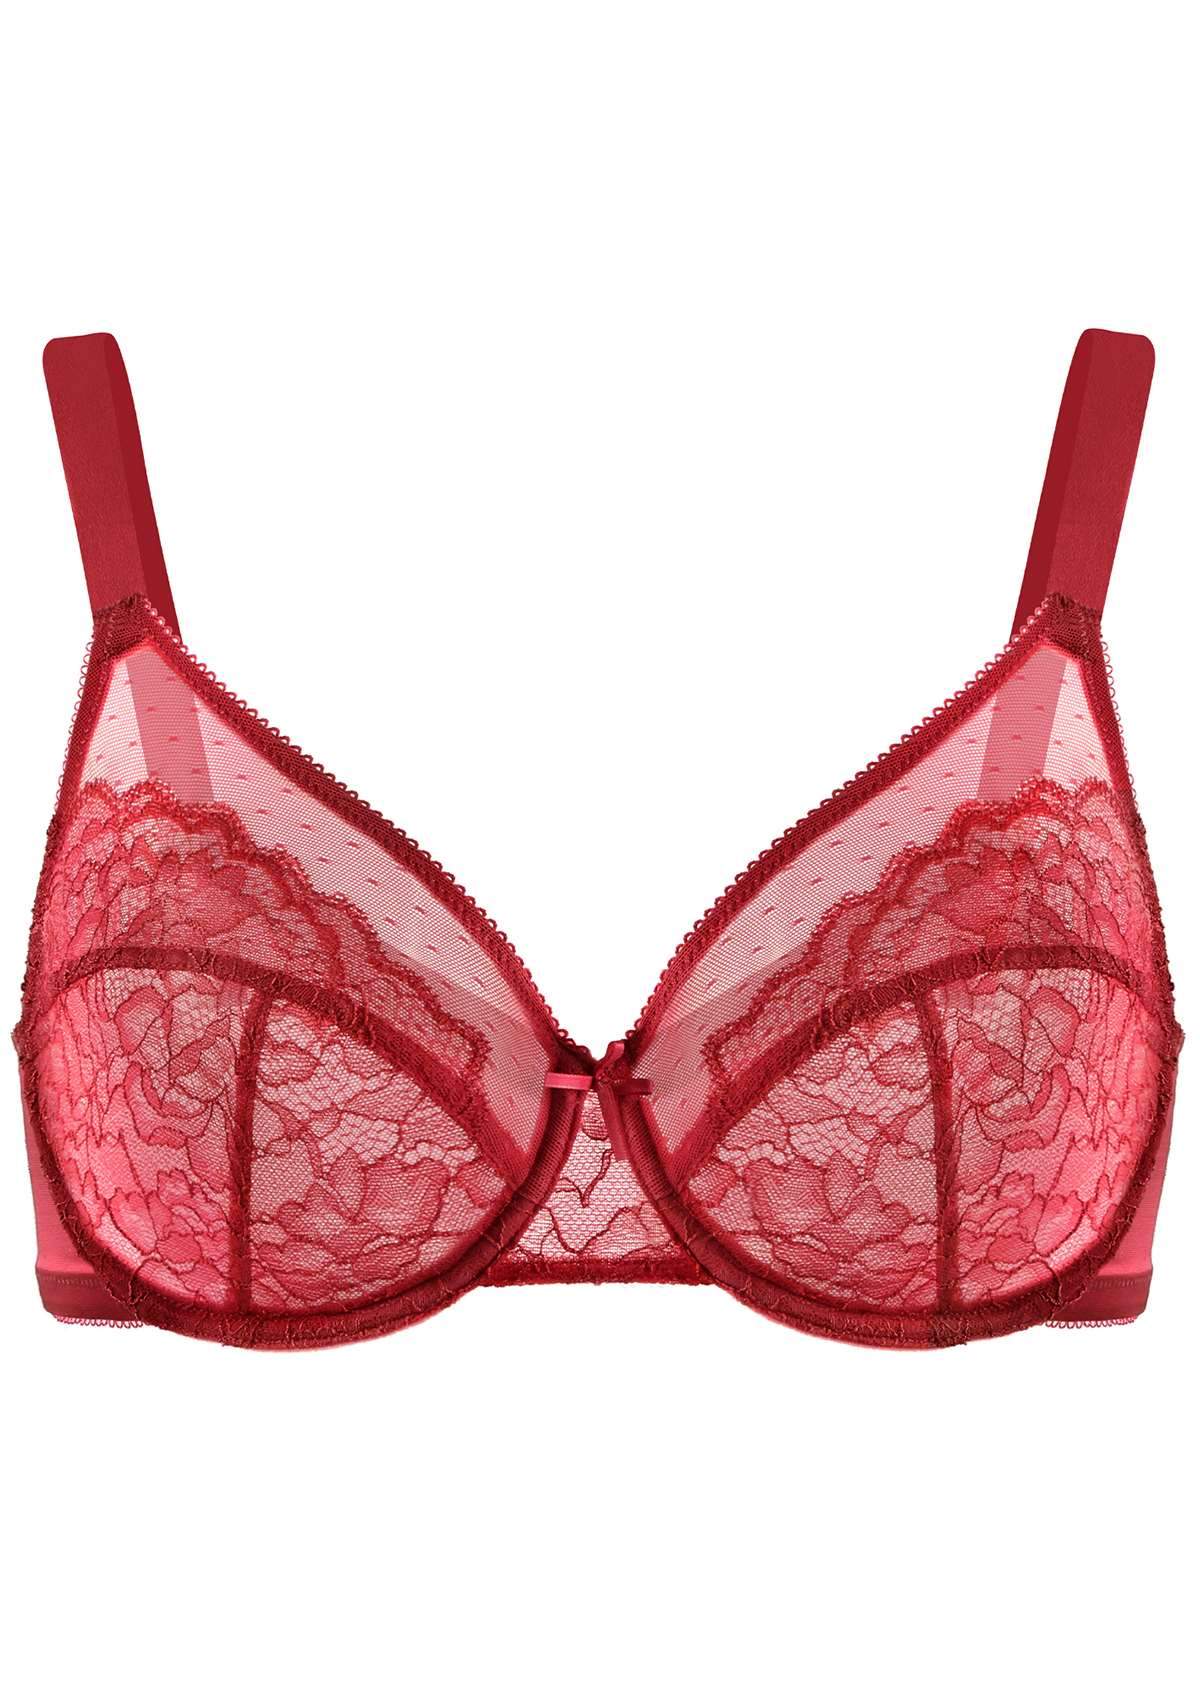 HSIA Enchante Full Support Lace Underwire Bra: Ideal For Big Breasts - Red / 34 / D